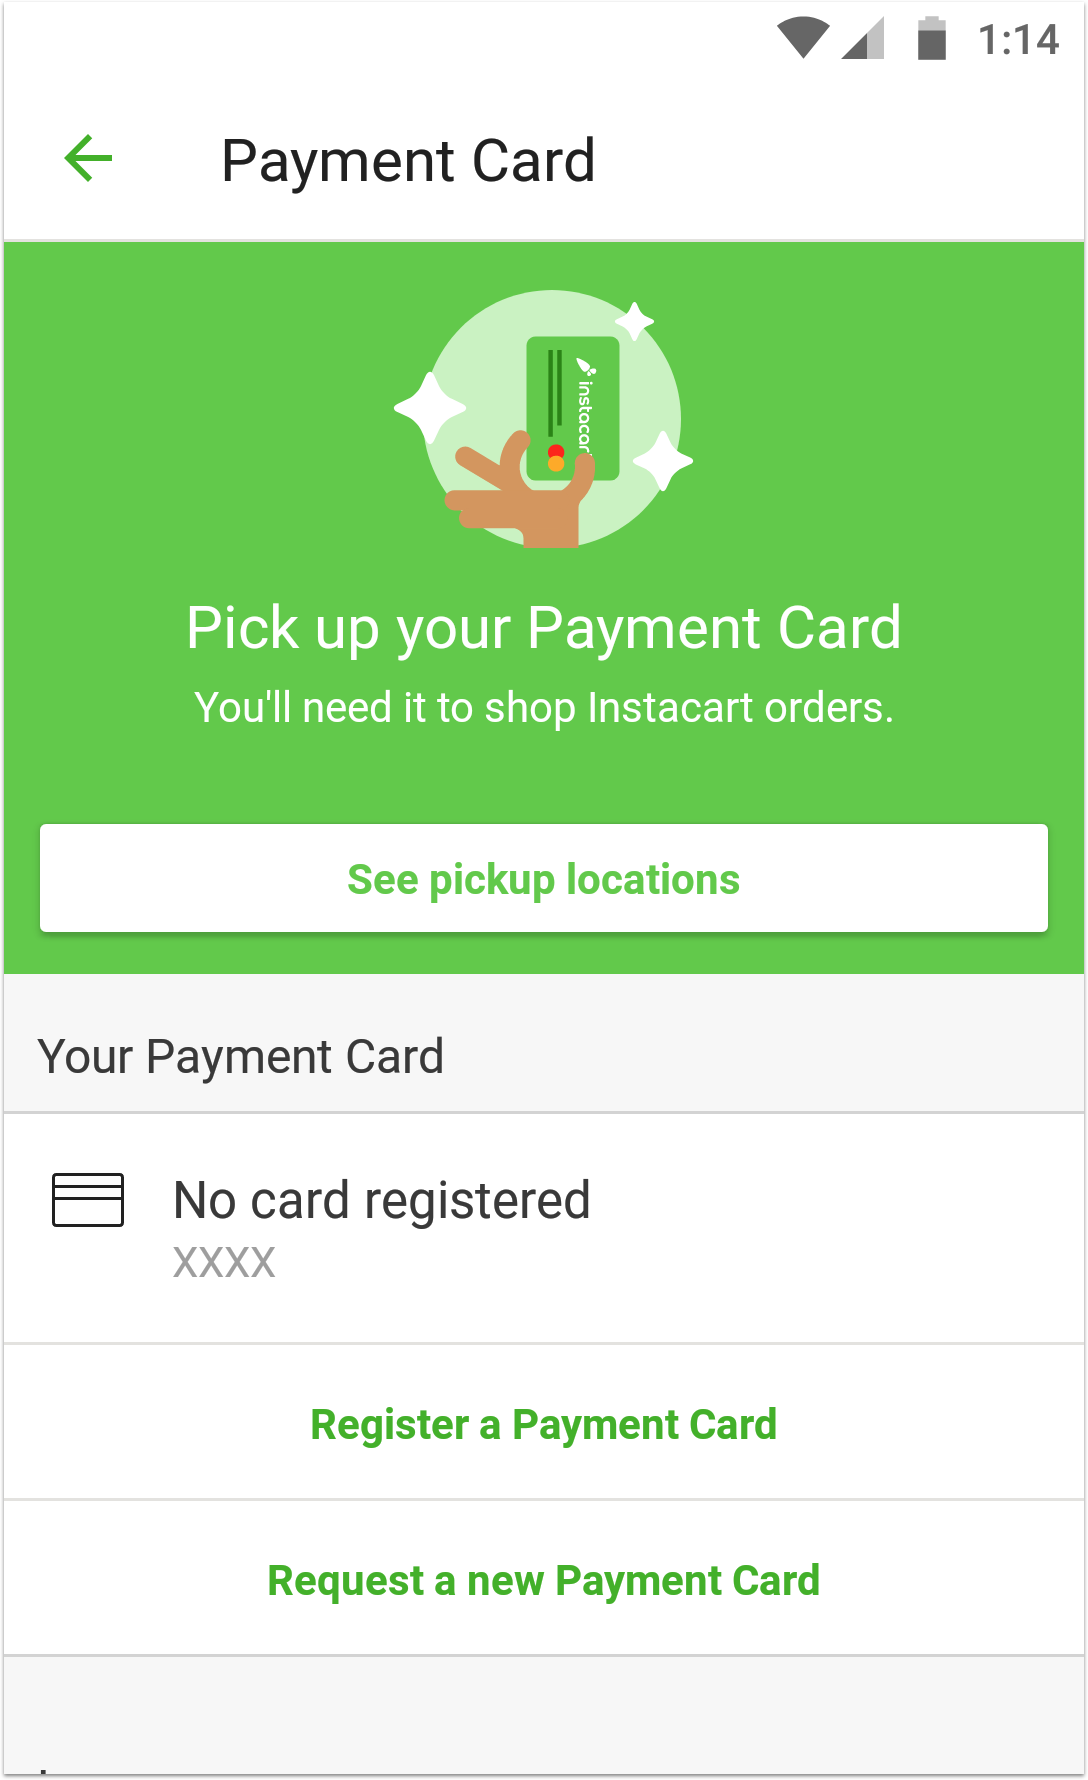 Need to replace your Instacart payment card?